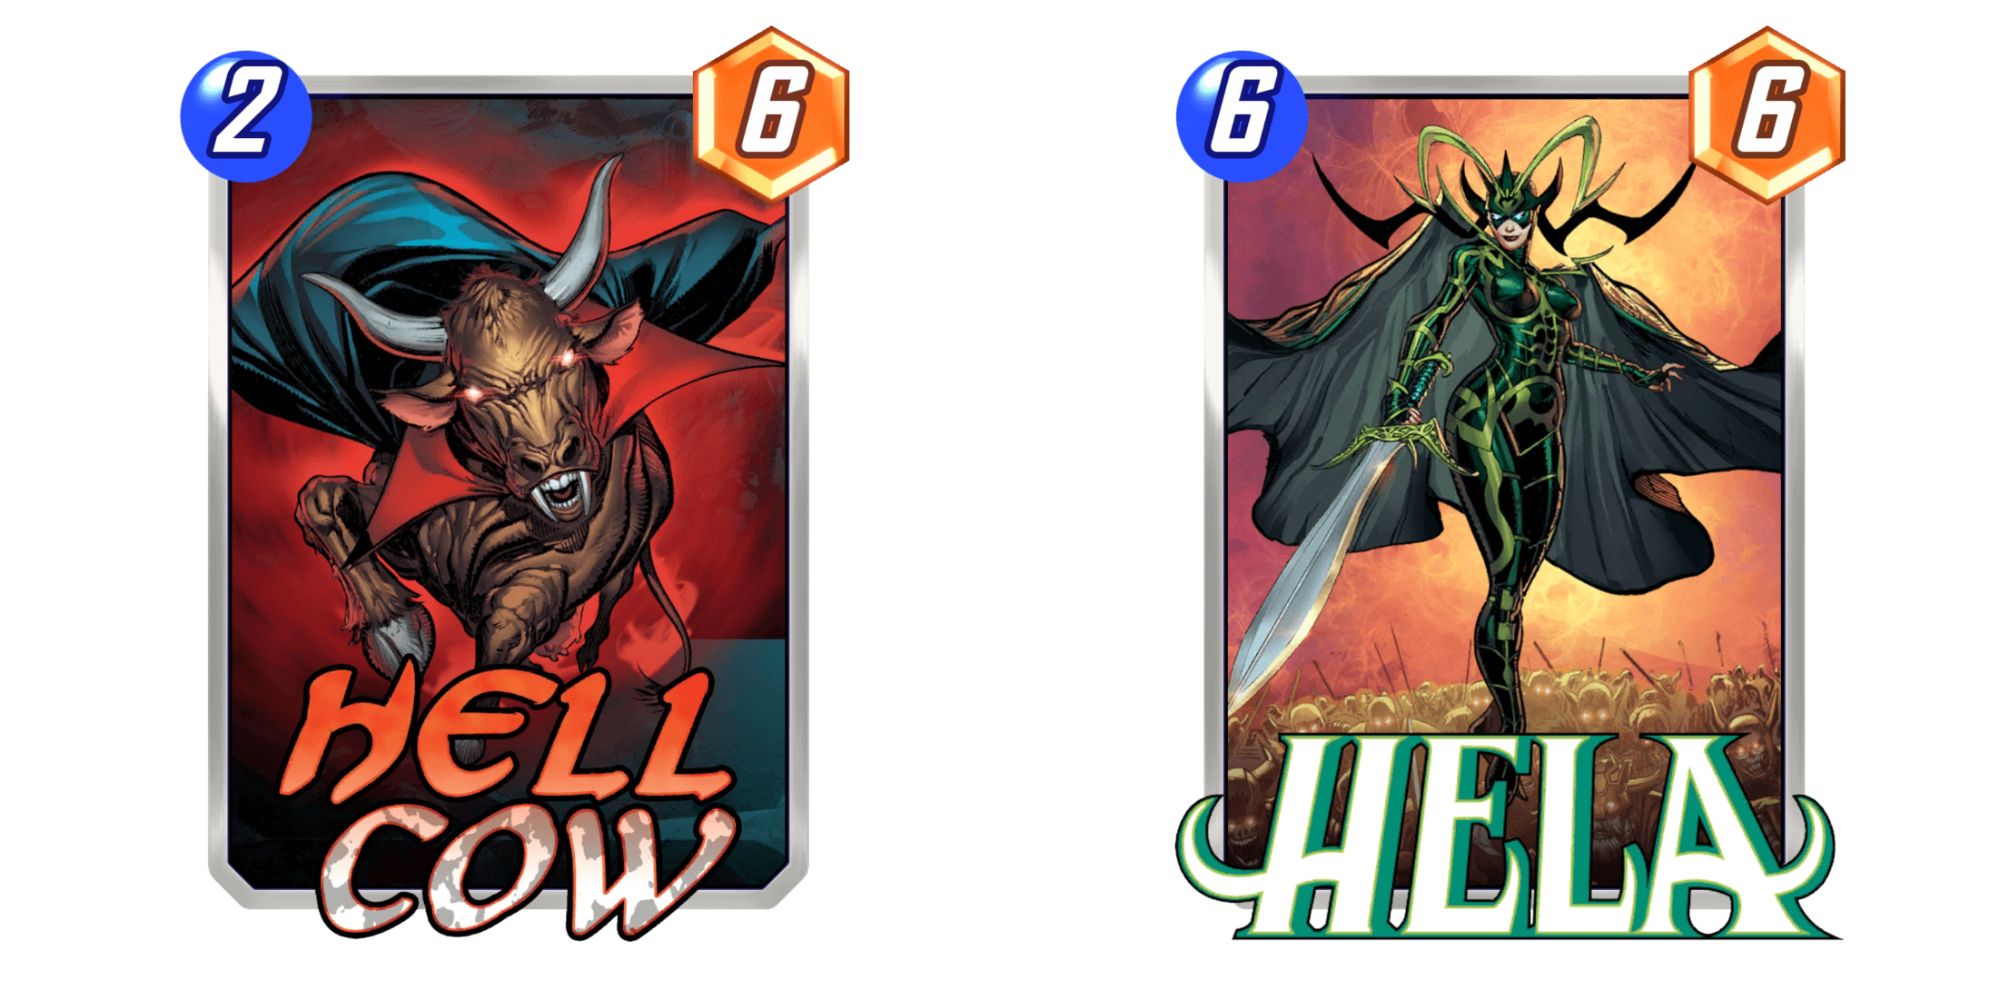 hell cow and hela